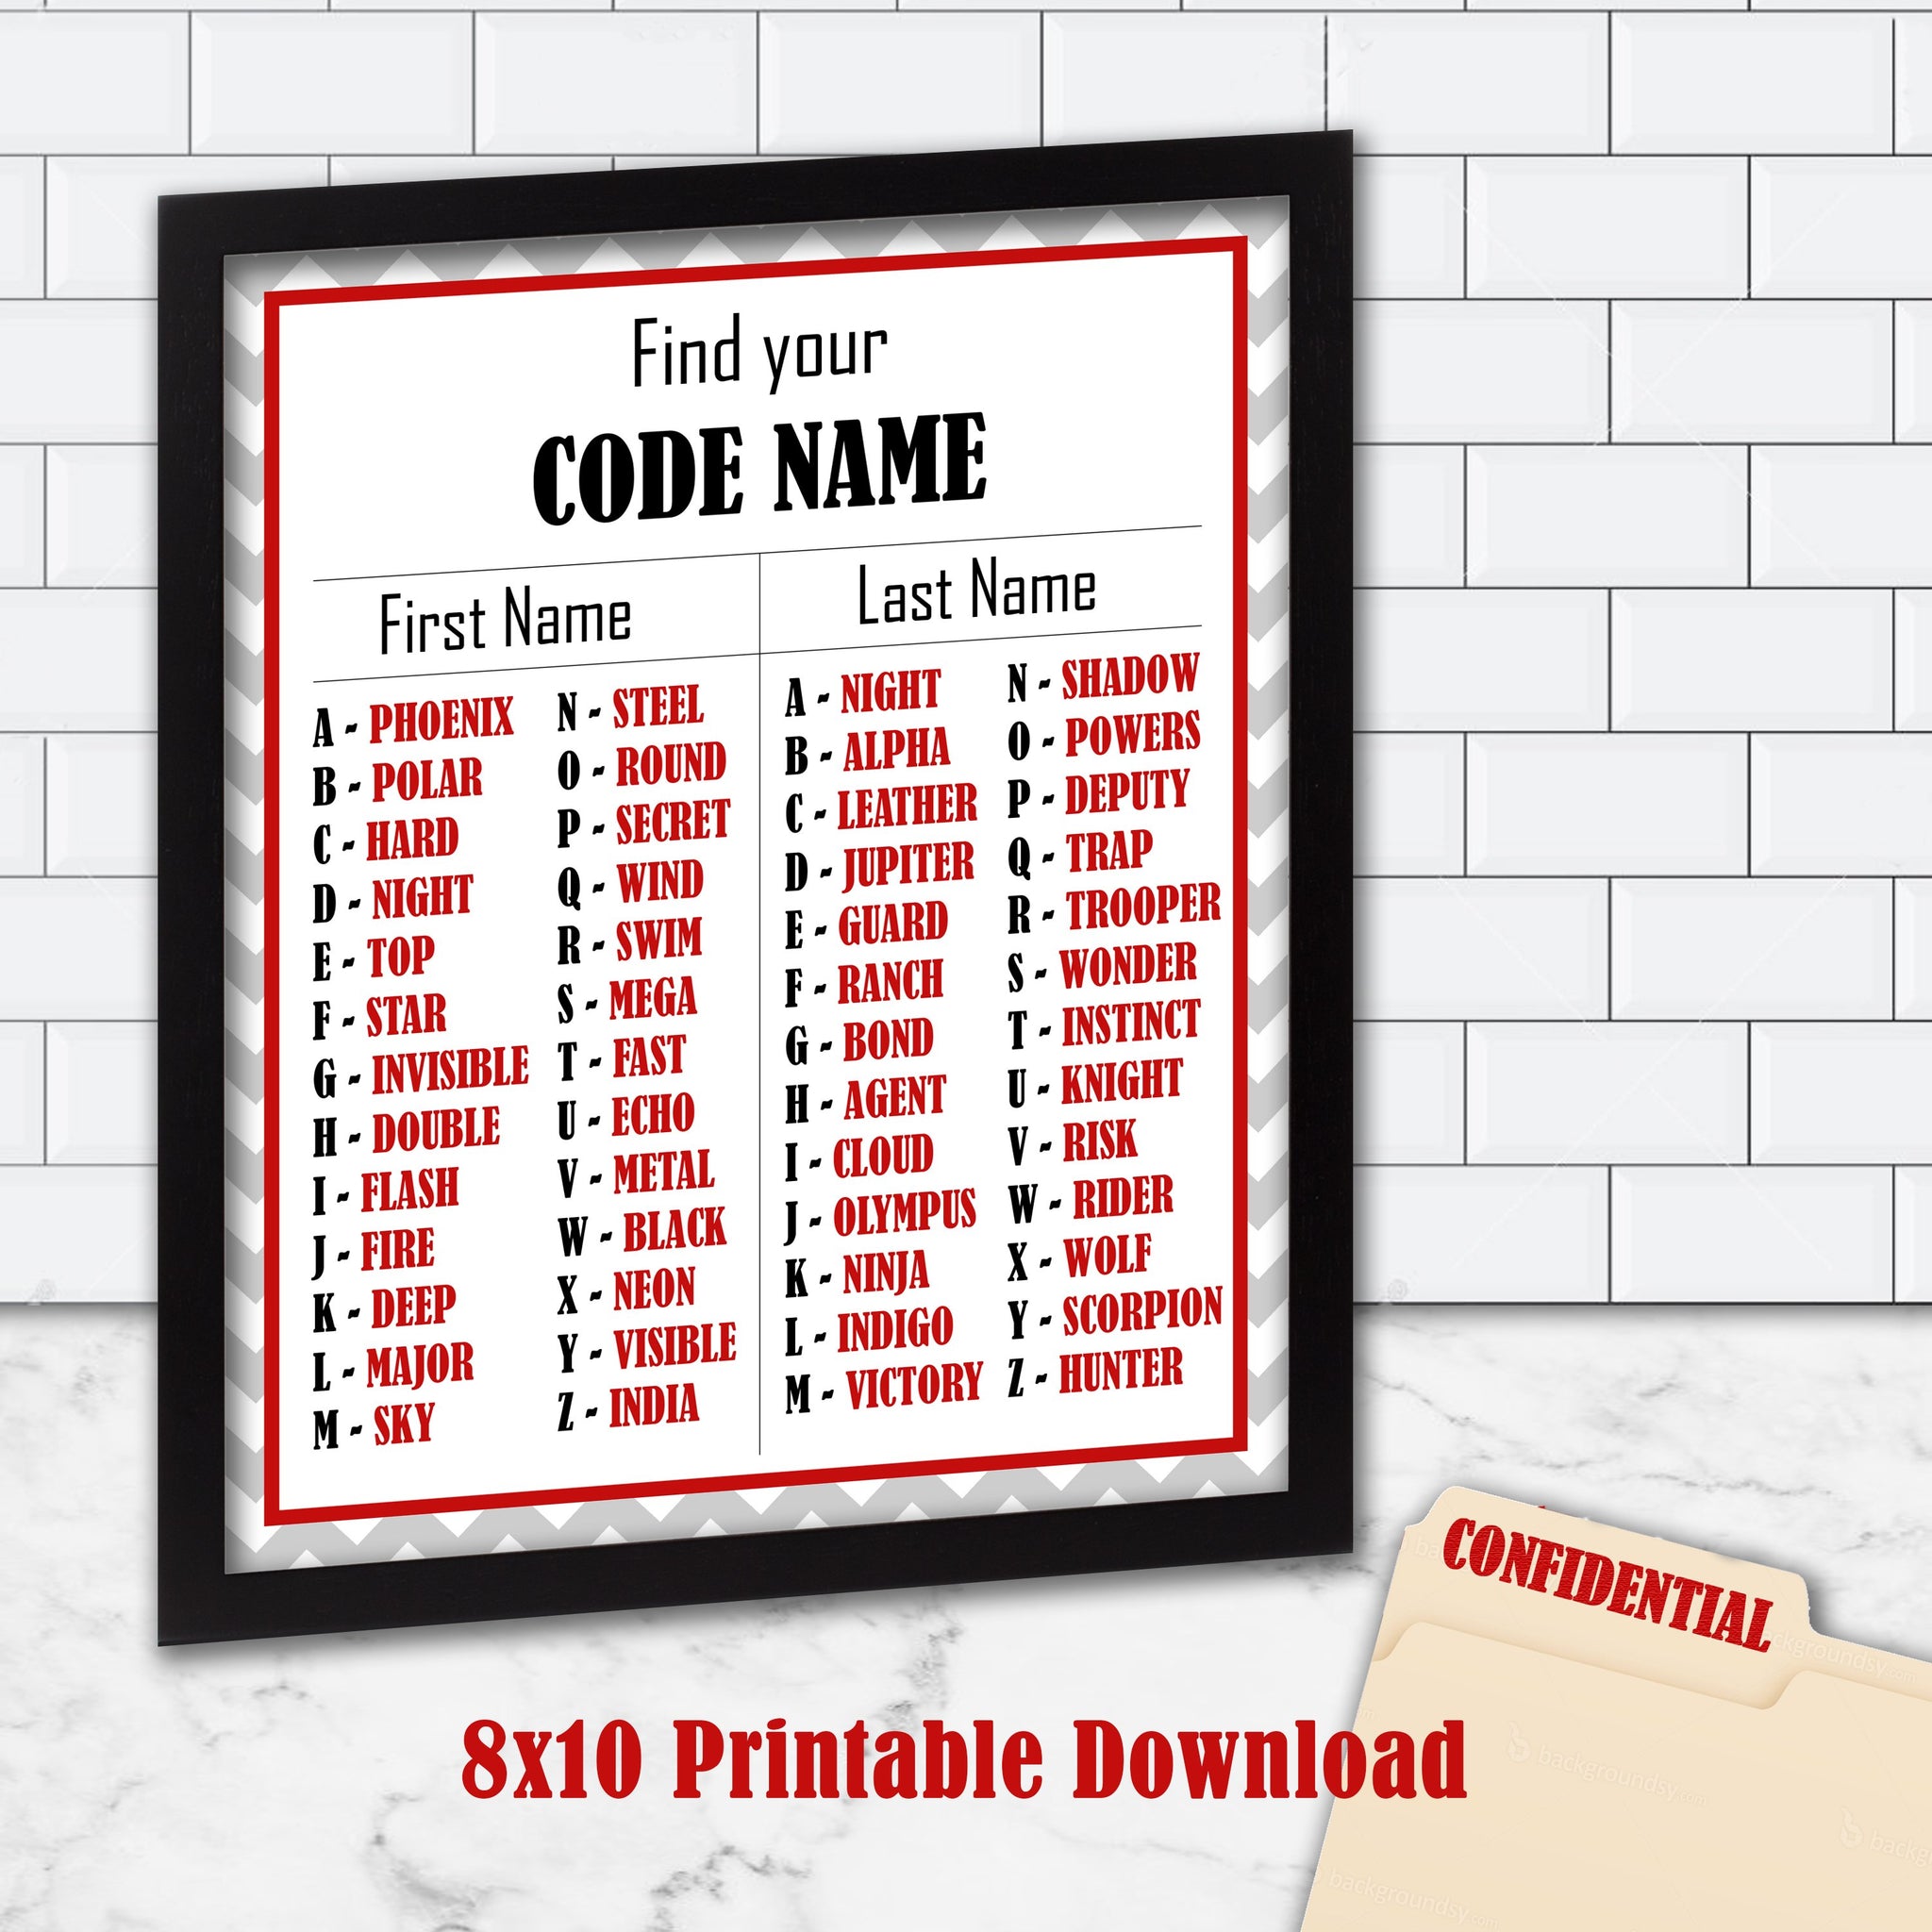 Printable Spy Secret Agent Code Name Chart - DIY Birthday Party Games -  LillyBellePaperie